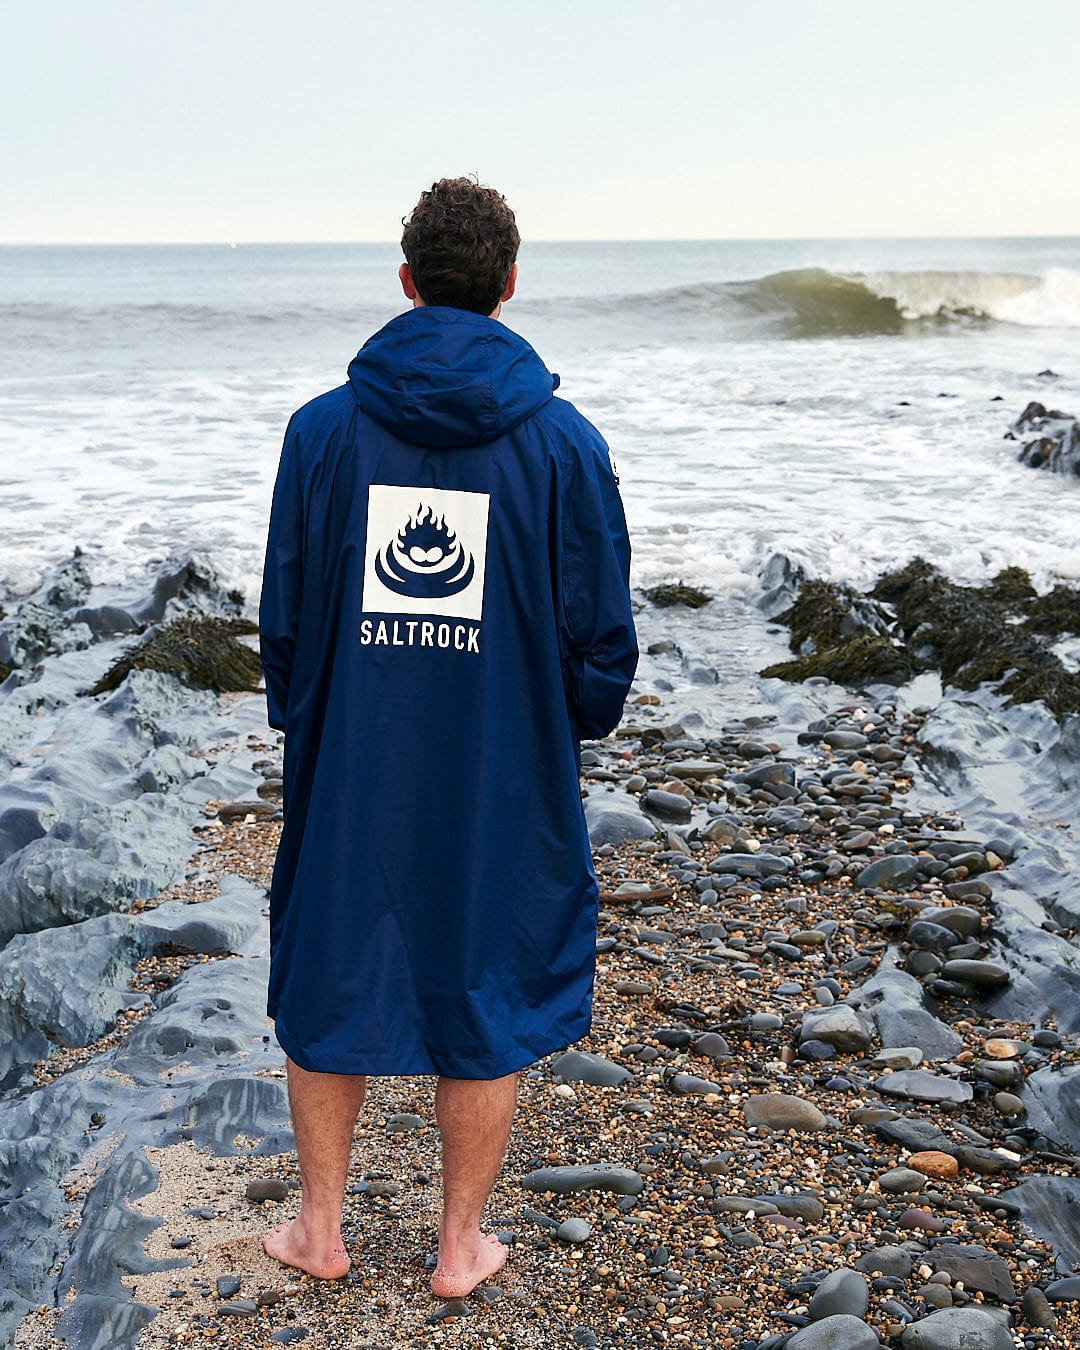 Man in a Saltrock Recycled Four Seasons Changing Robe - Blue standing on a pebble beach, looking at the ocean waves.